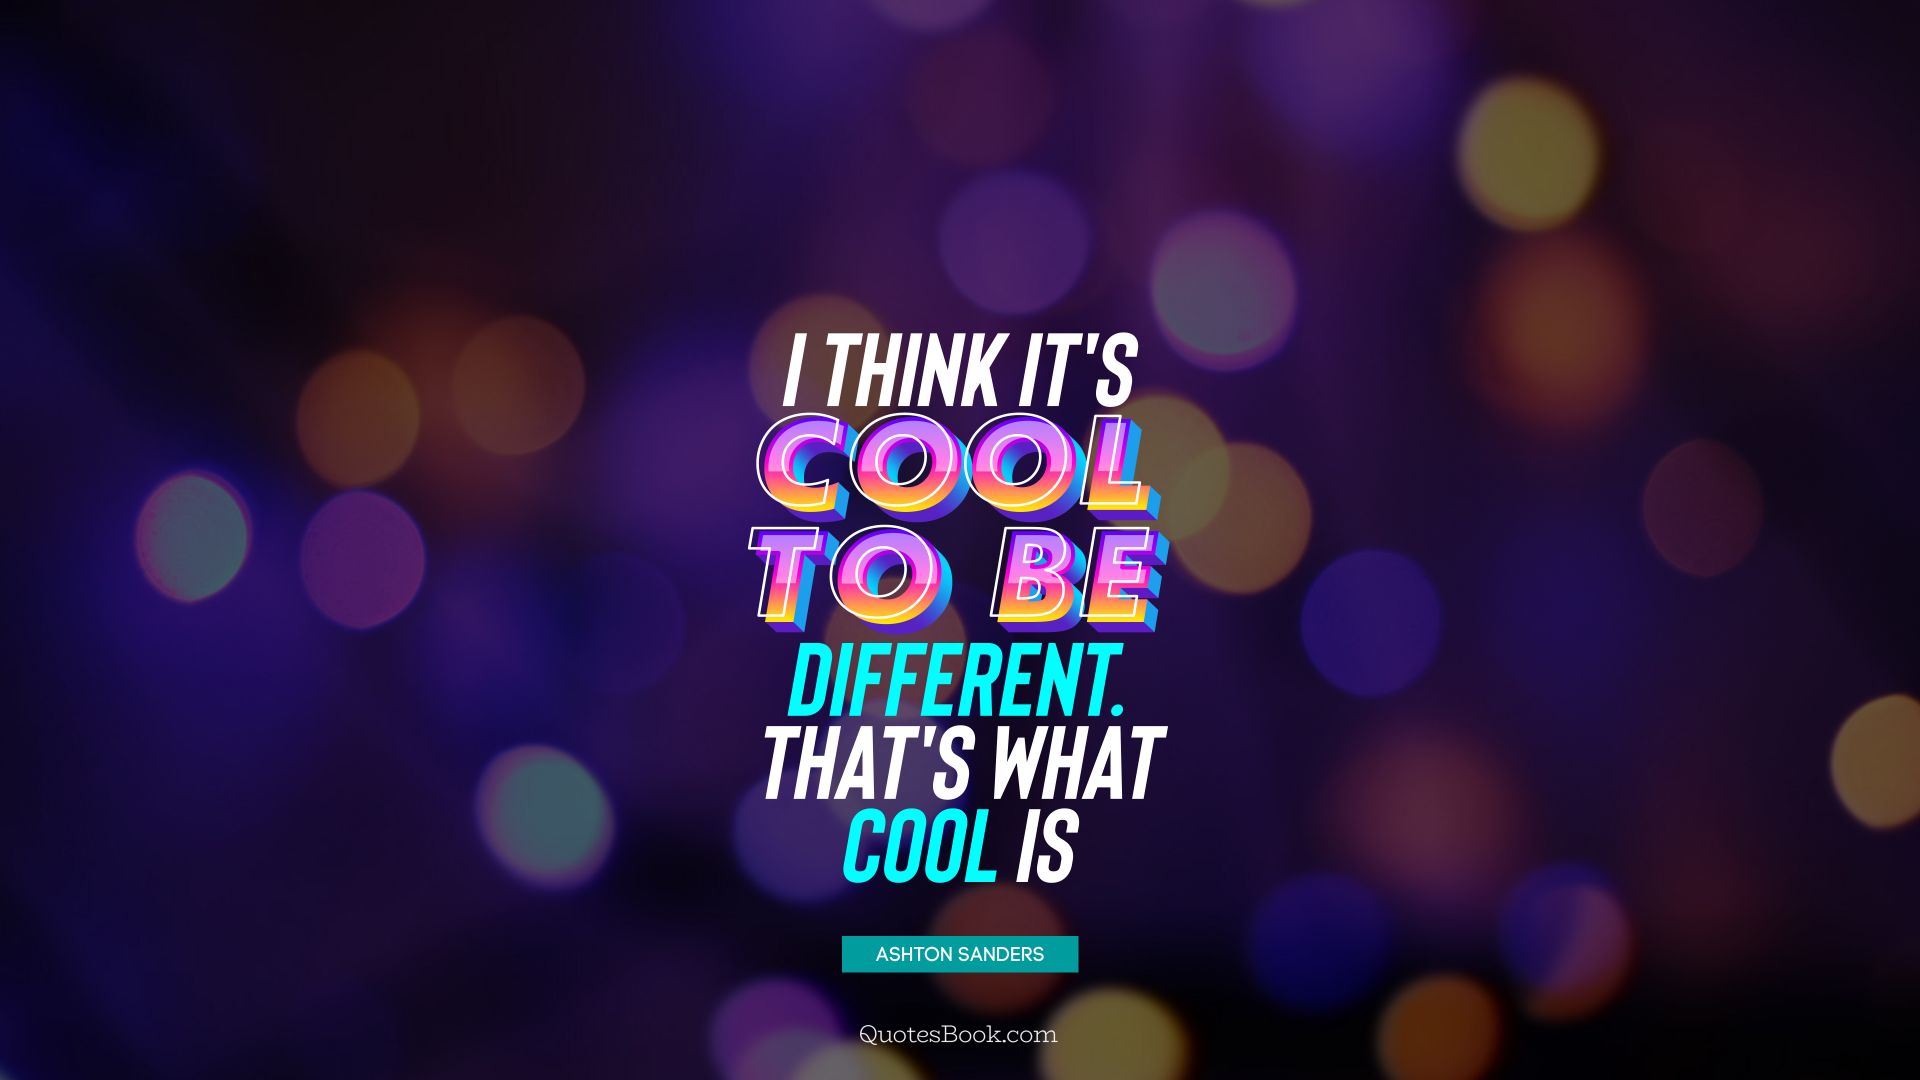 I think it's cool to be different. That's what cool is. - Quote by Ashton Sanders